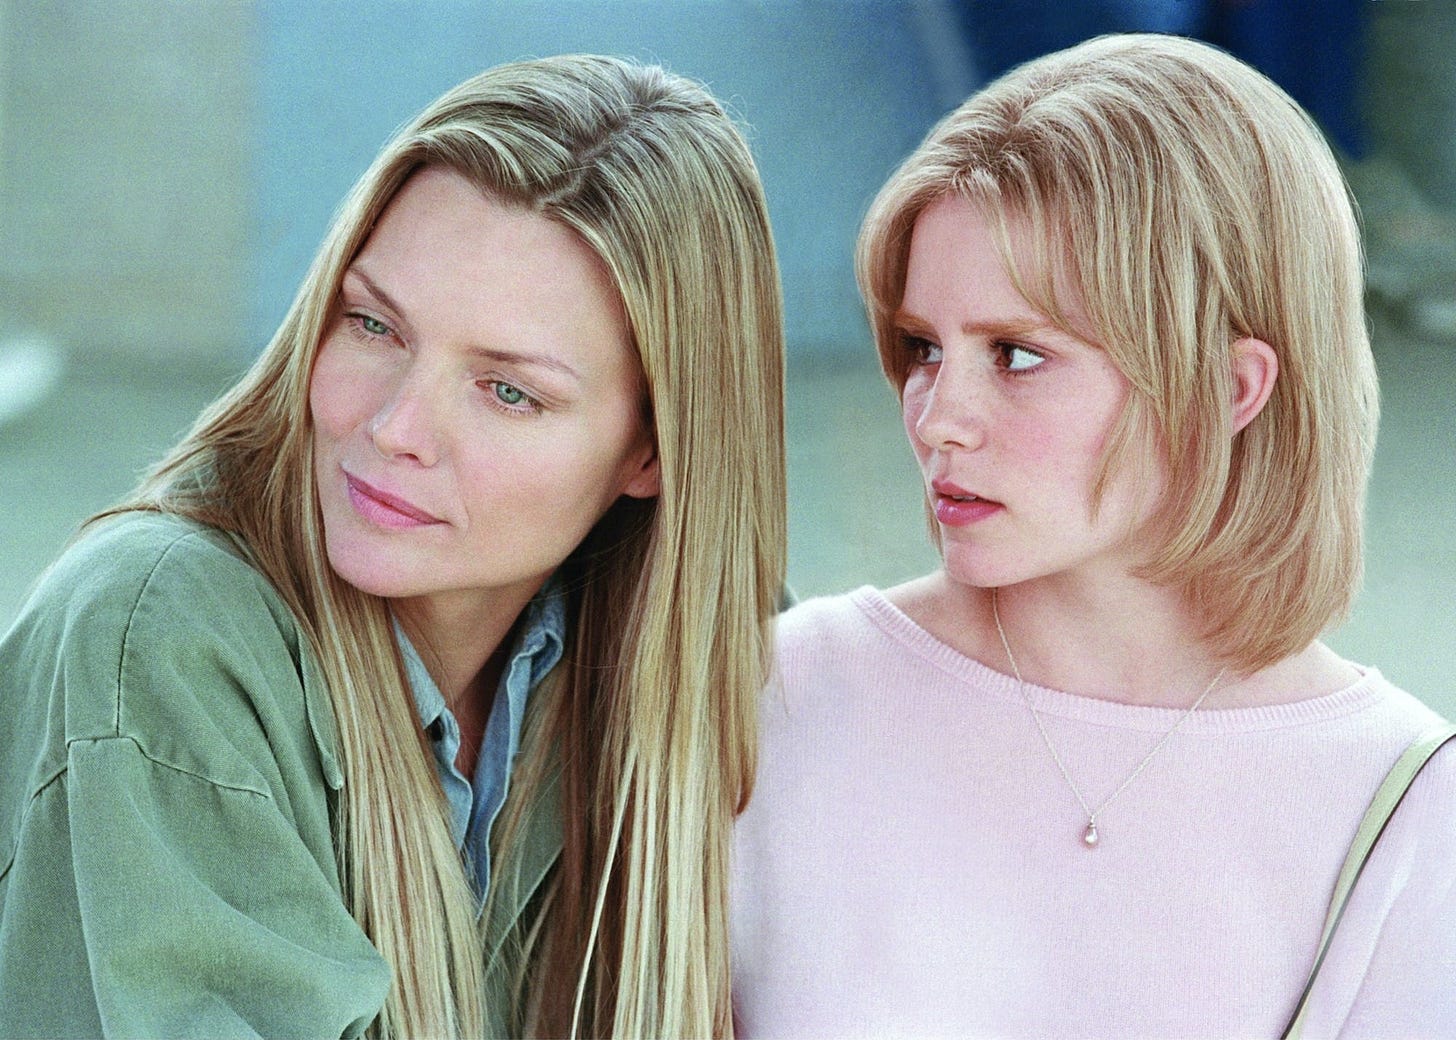 Movie still from White Oleander. A mother sits with her daughter, both blonde